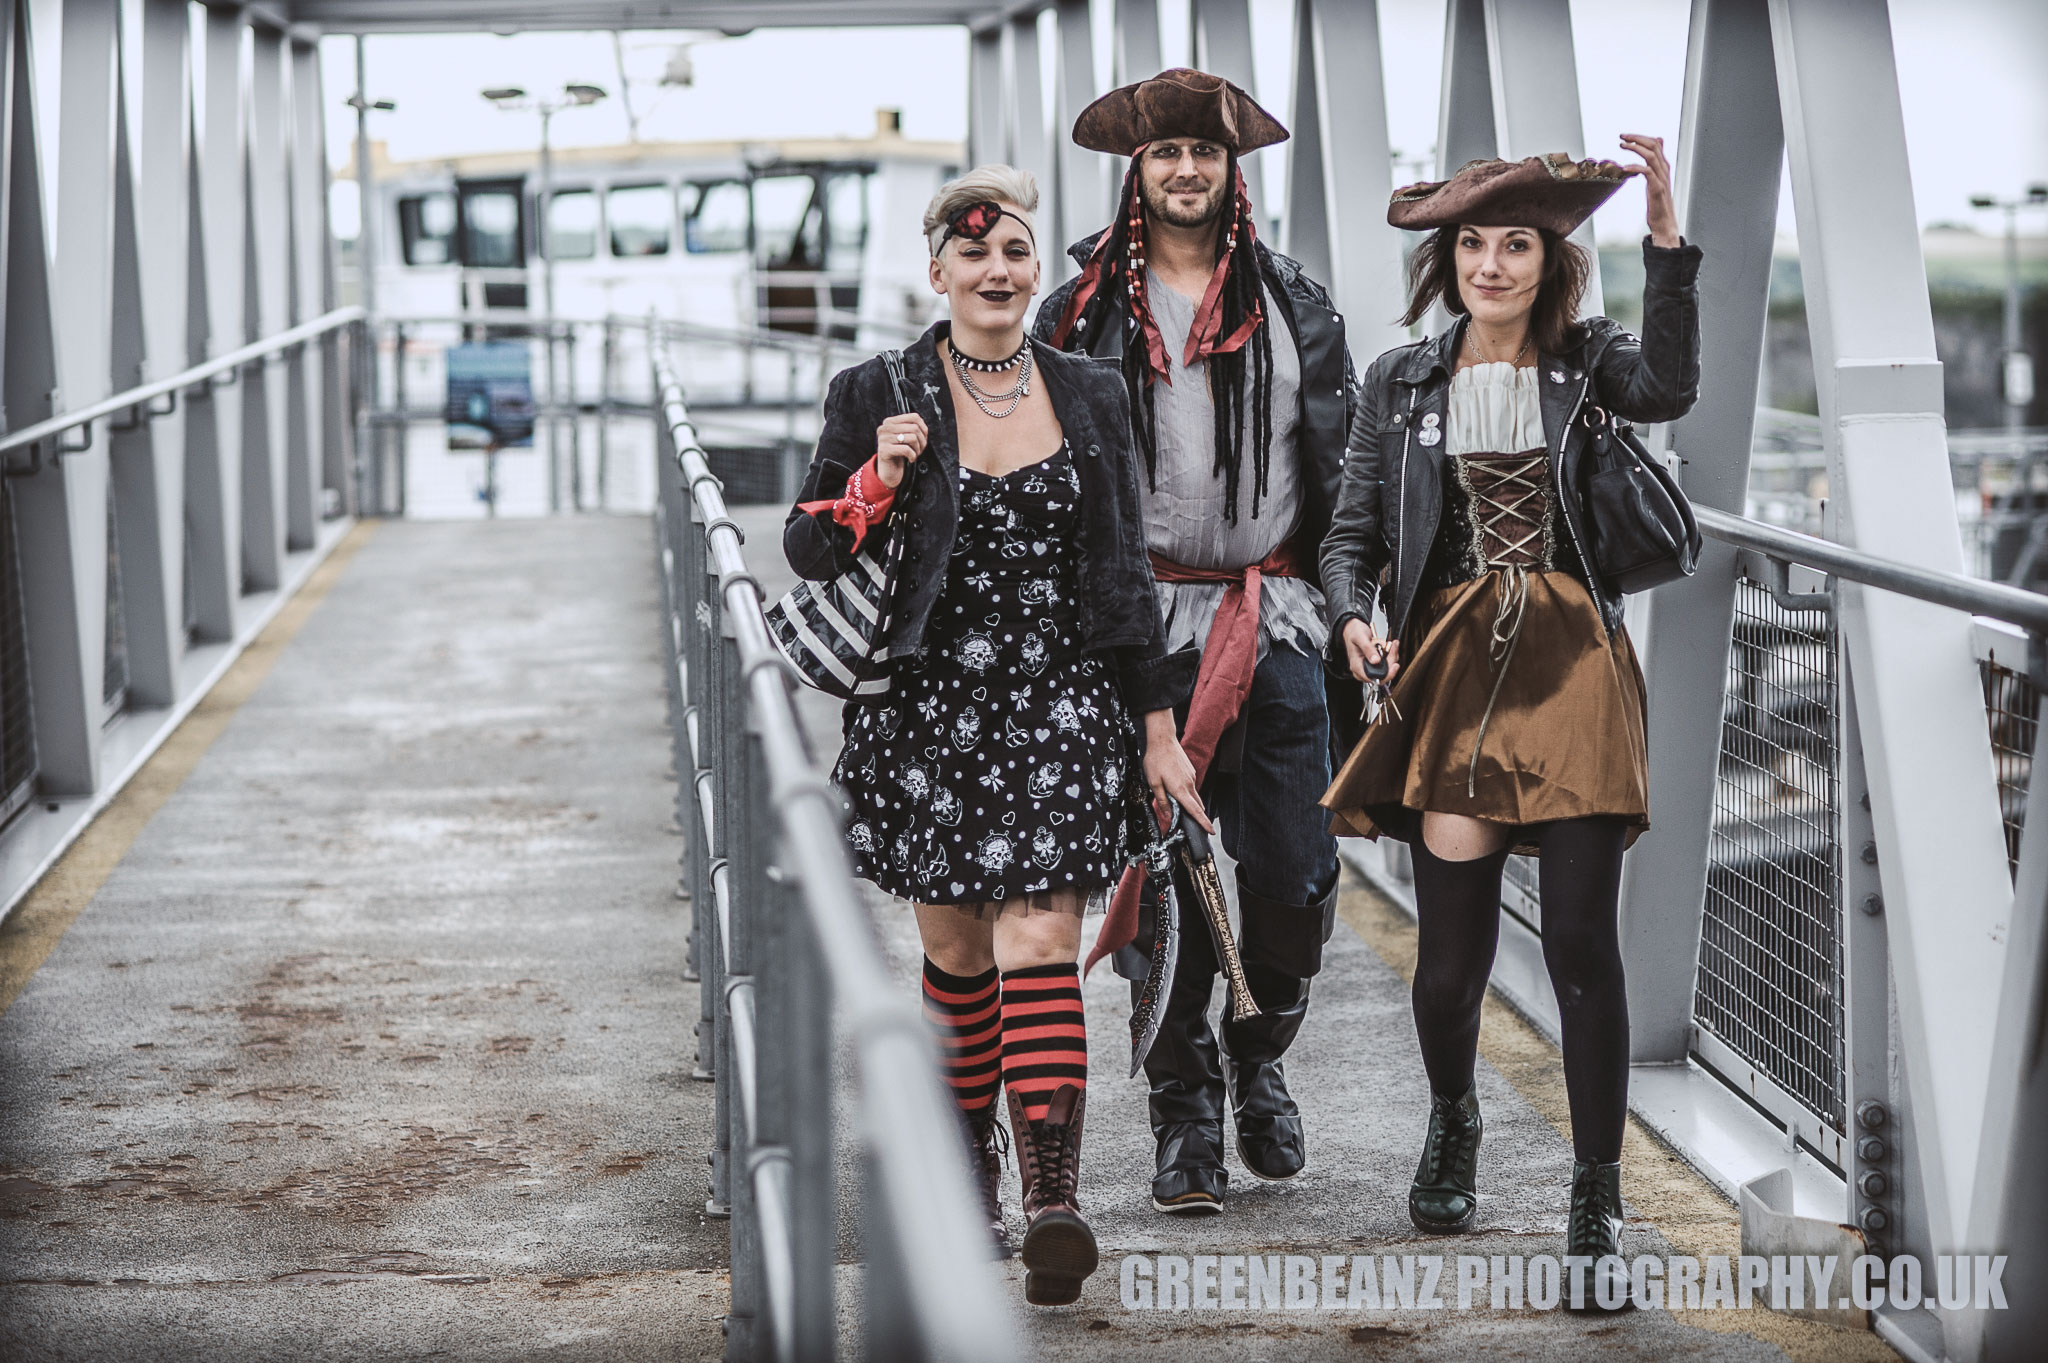 Punk fans in Pirate fancy dress arrive on Plymouth Barbican